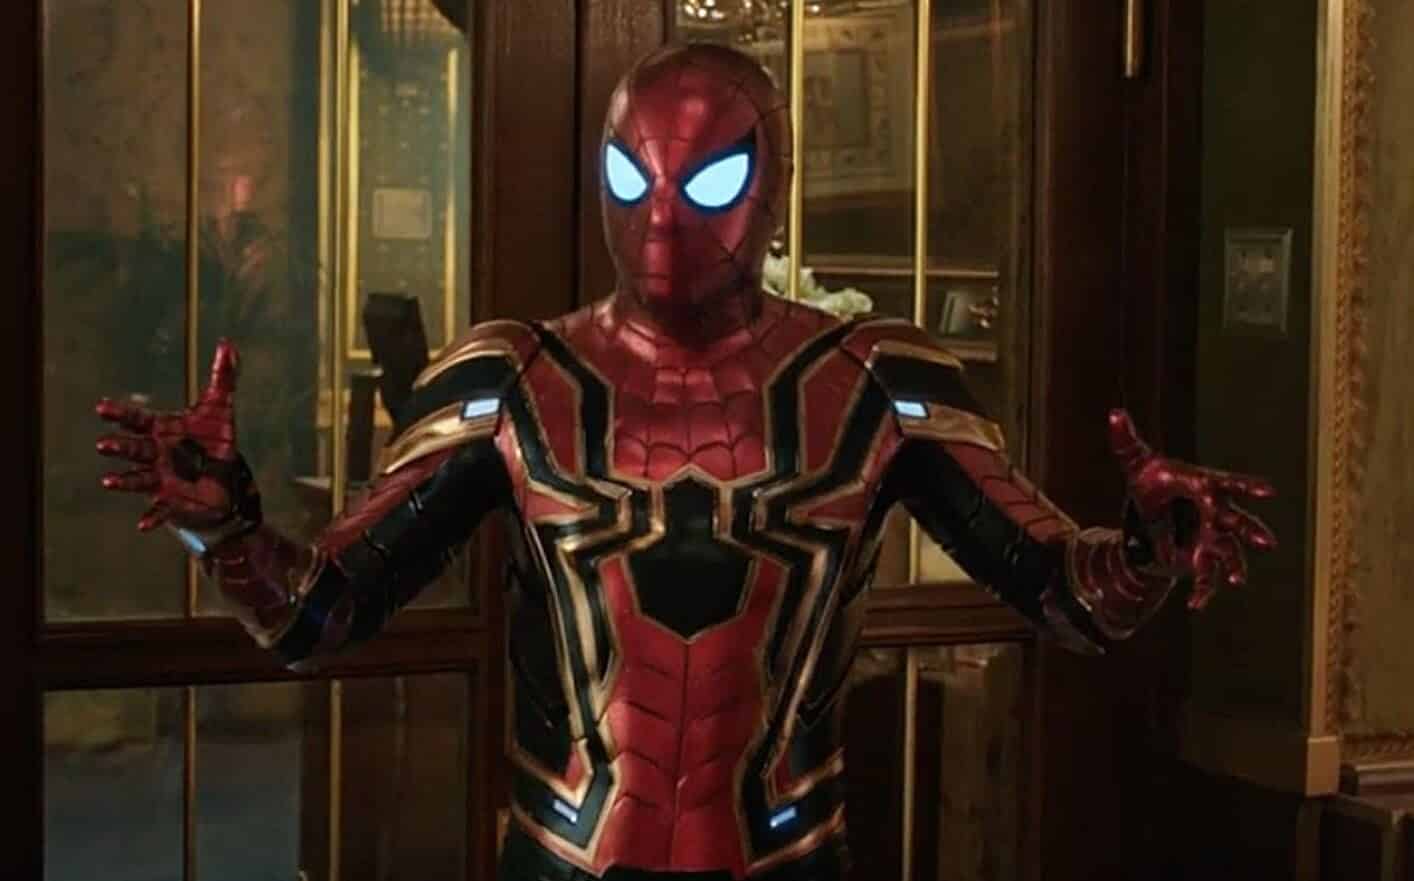 Spider-Man: Far From Home Trailer